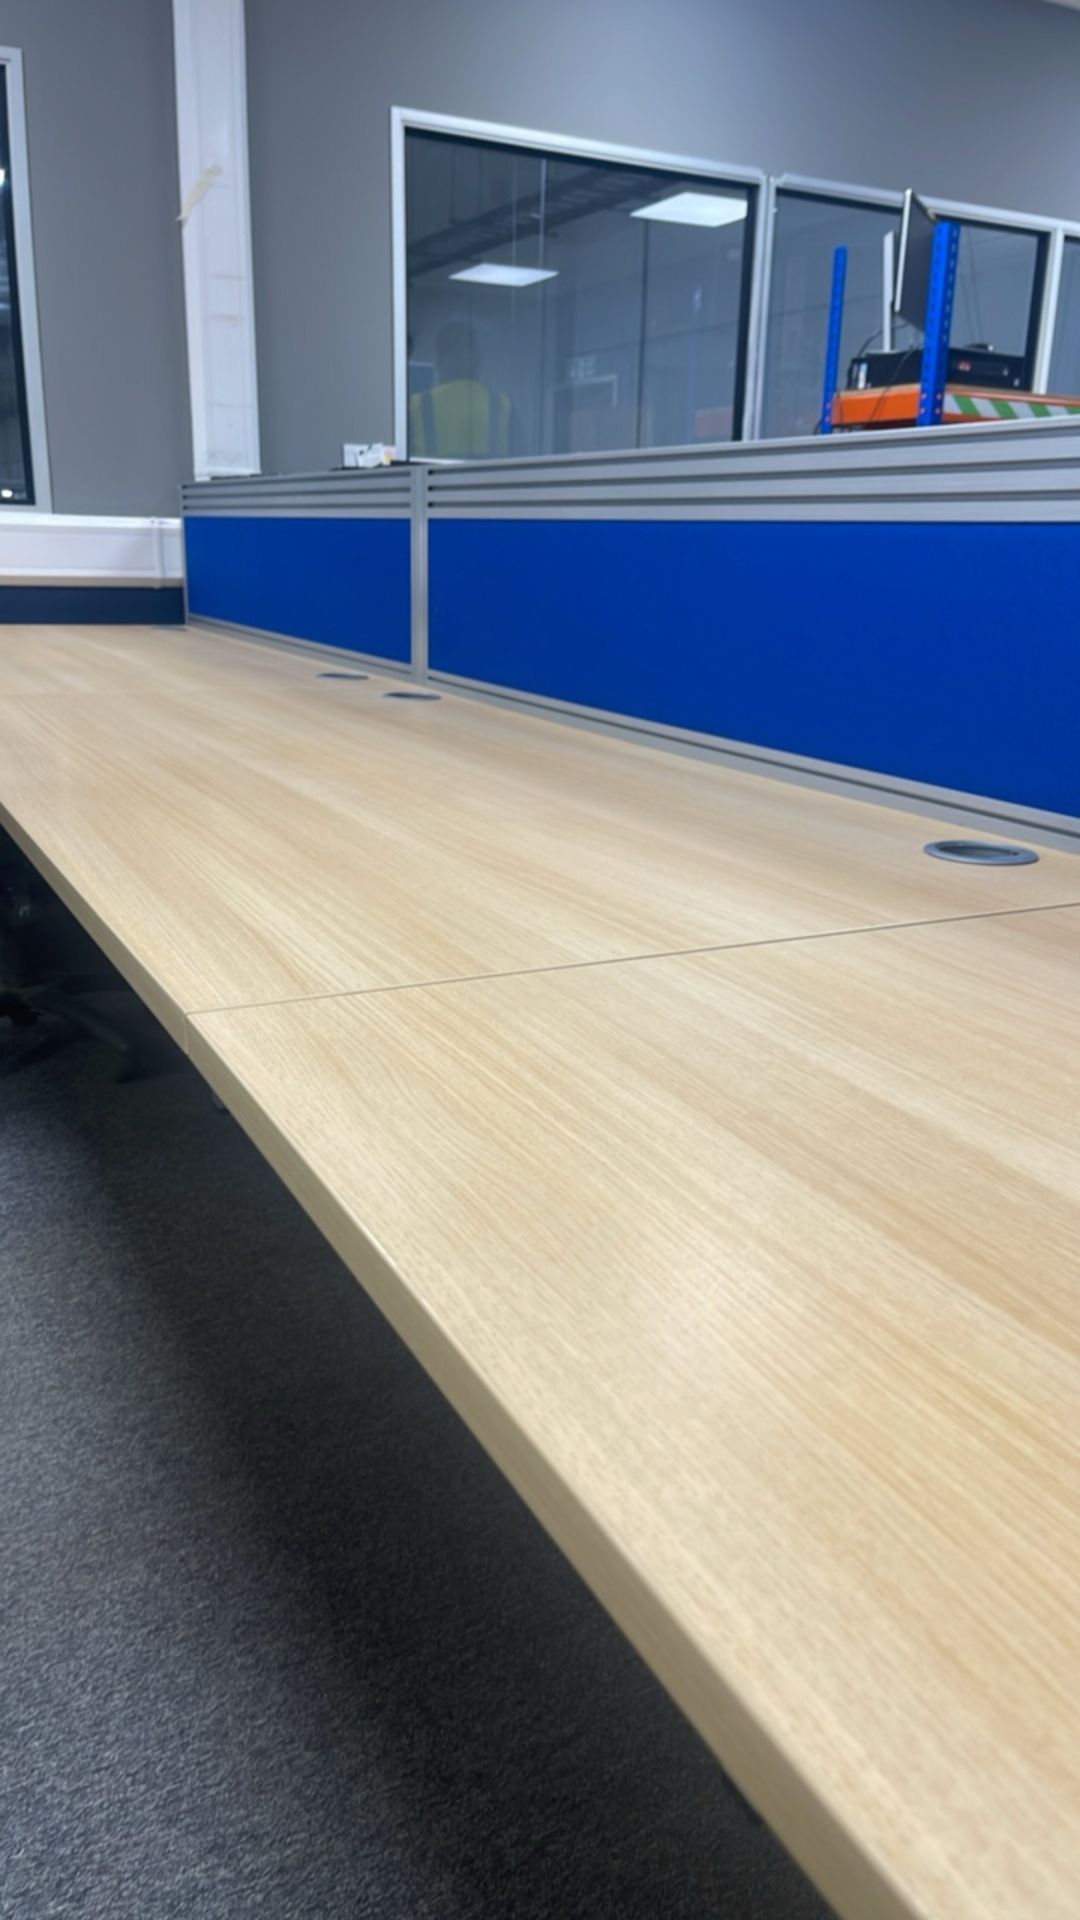 Double Bank Of Hot Desks - Image 7 of 7